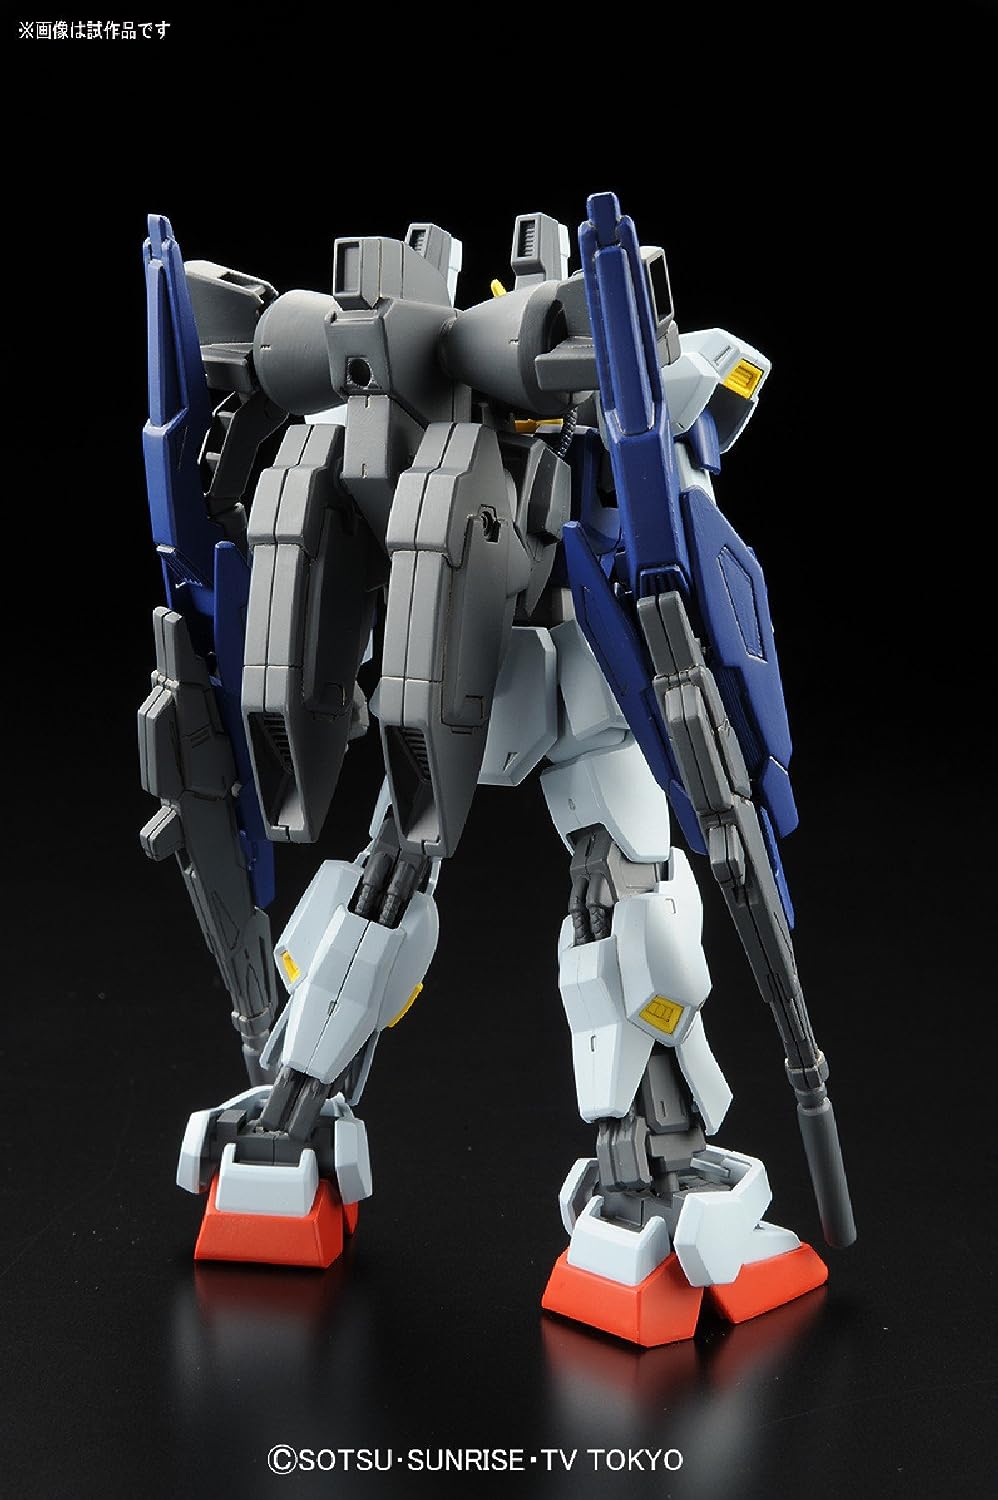 1/144 HGBF "Gundam Build Fighters" Mobile Suit A | animota